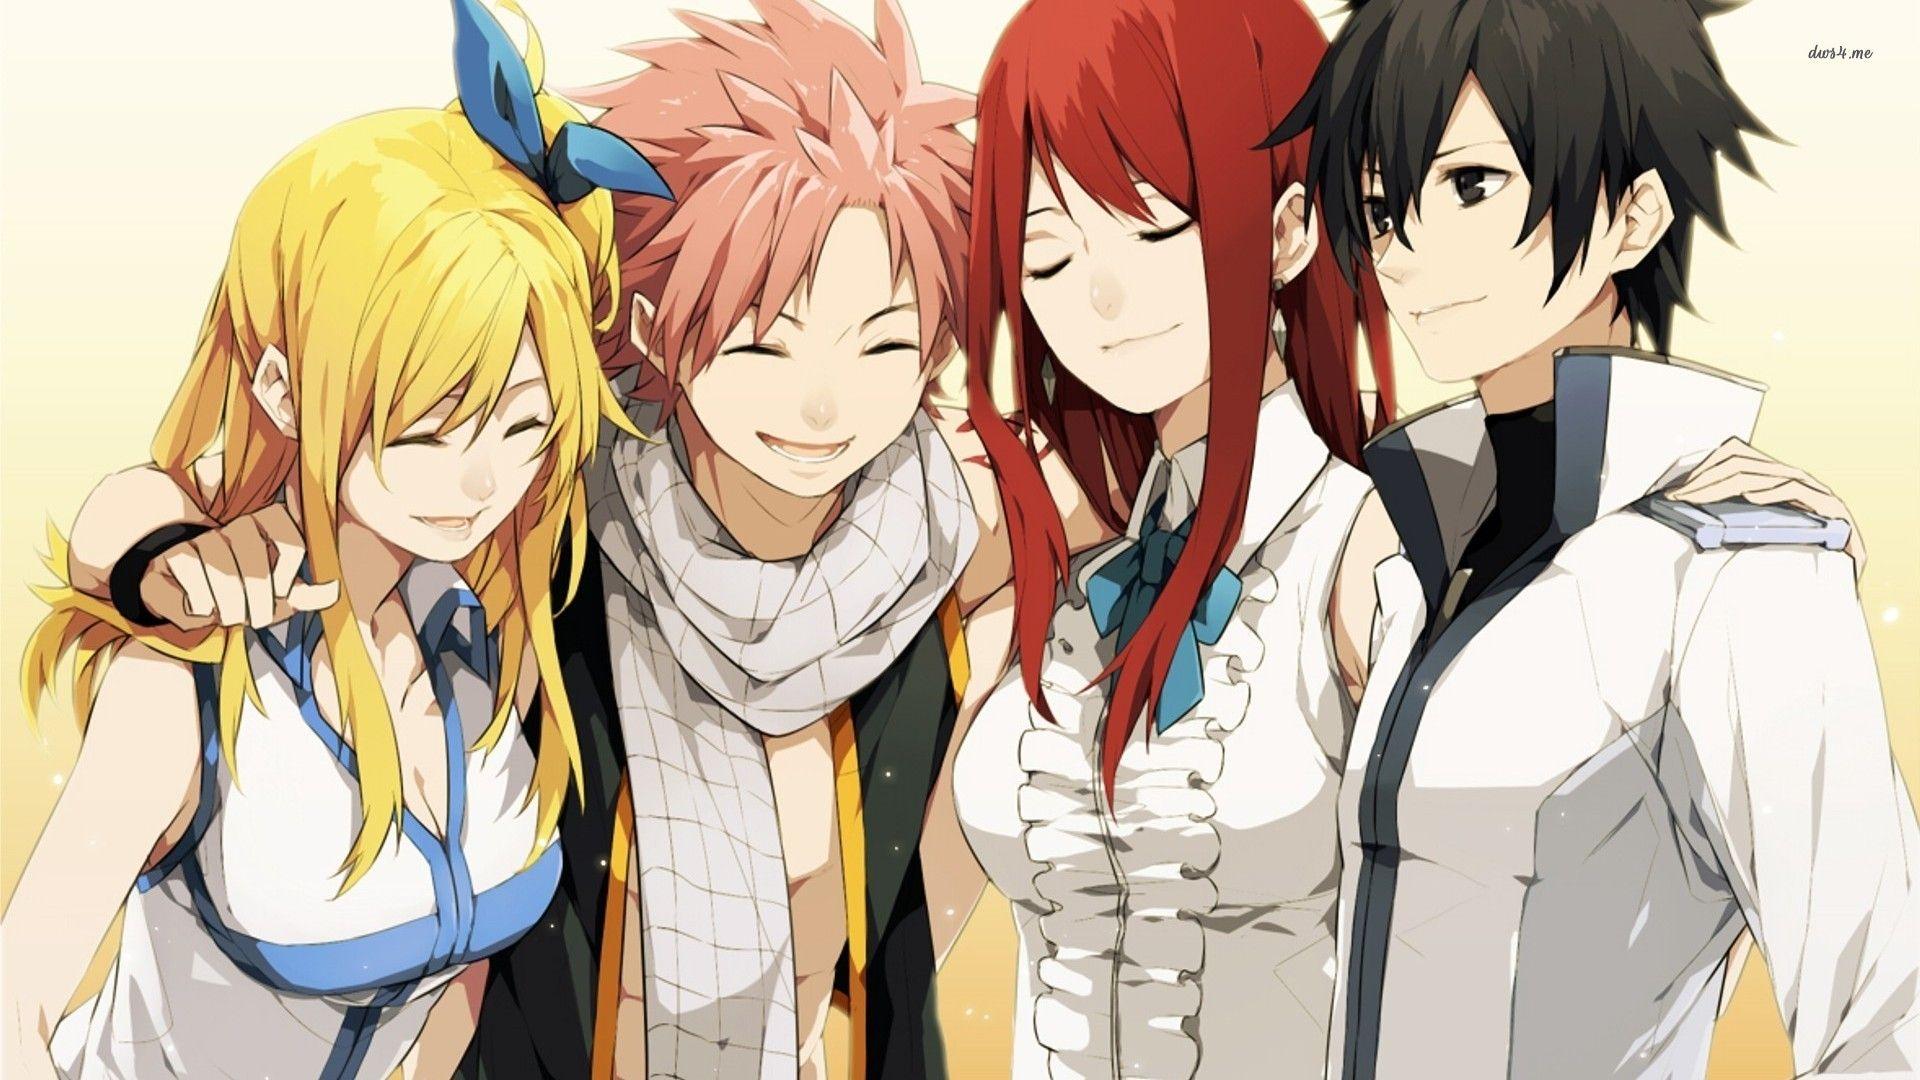 30 Download Wallpaper Anime Fairy Tail Anime Wallpaper